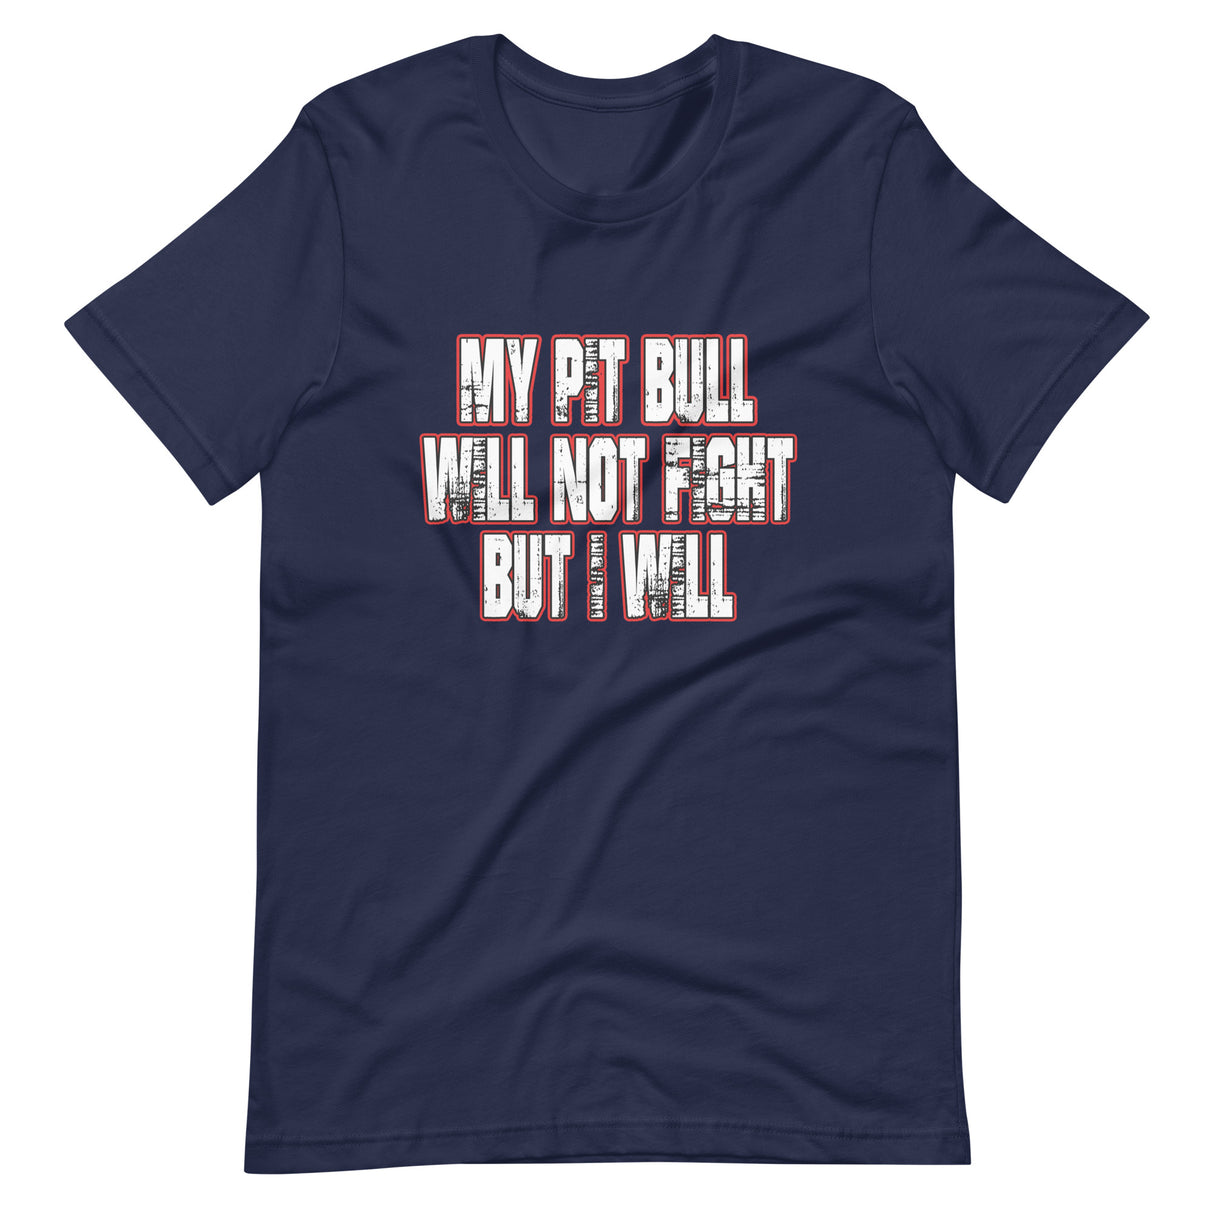 My Pit Bull Will Not Fight But I Will Shirt